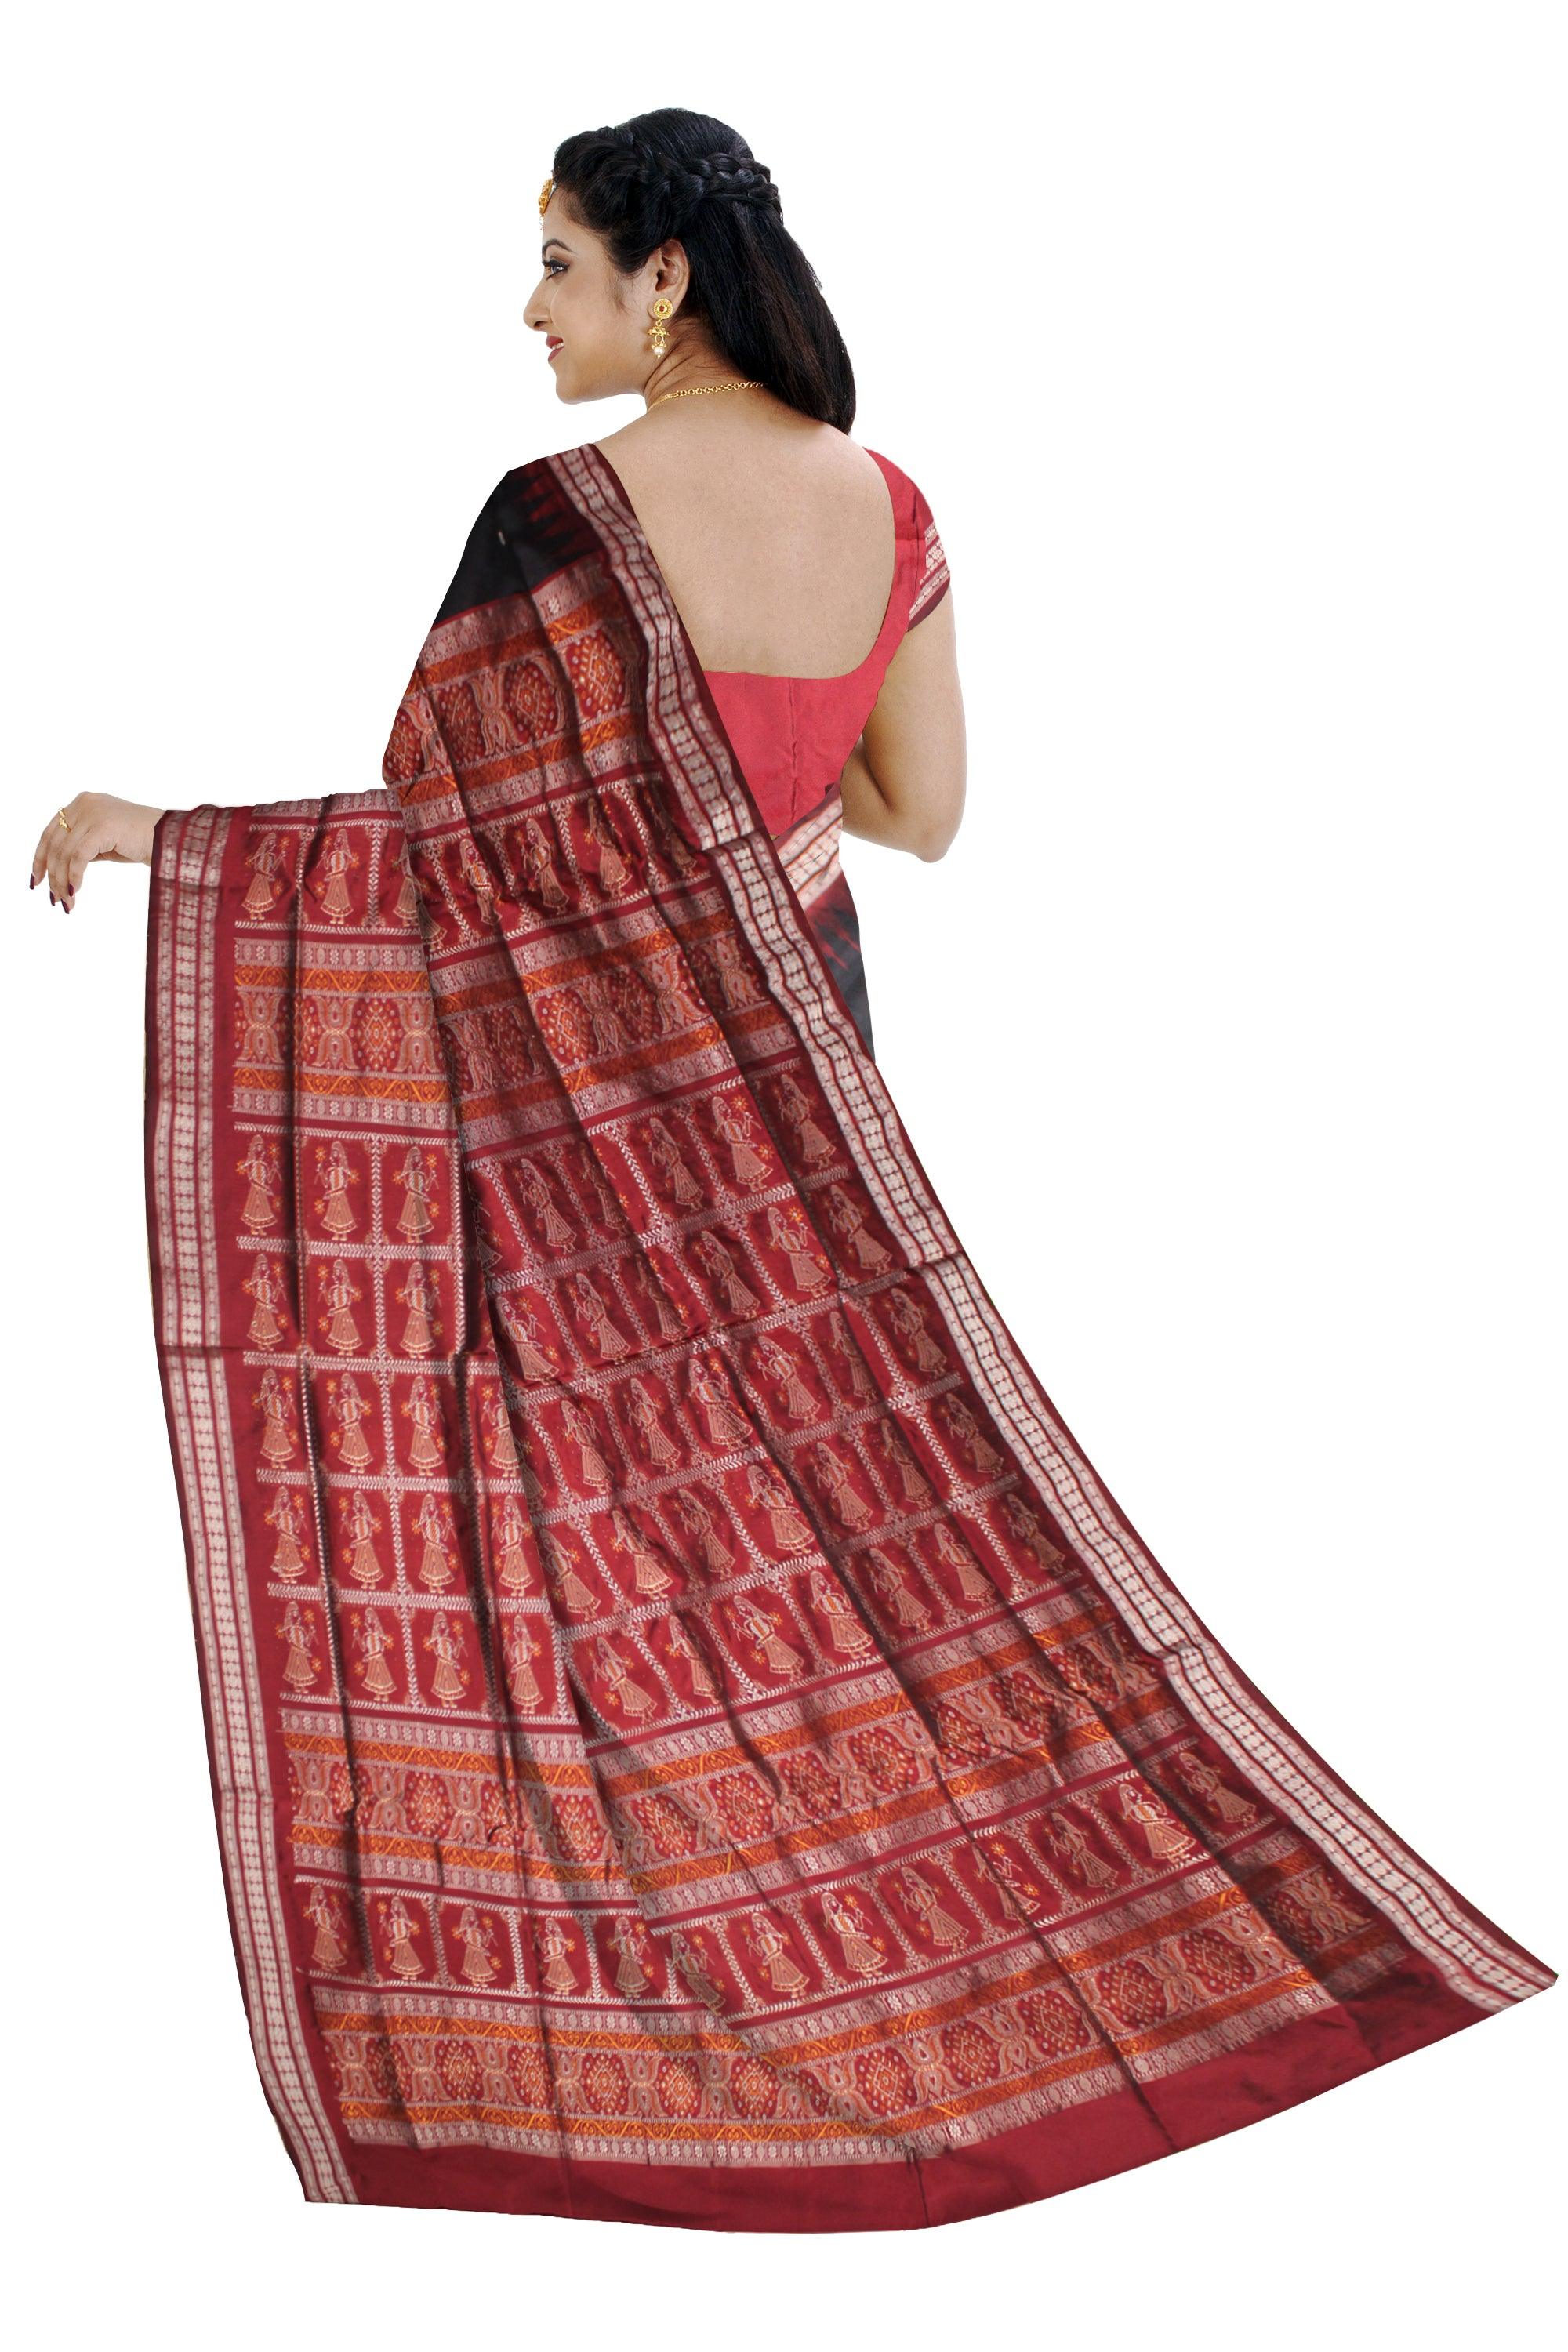 SMALL BOOTY PATTERN PATA SAREE IS BLACK AND MAROON COLOR BASE, PALLU IS DOLL PRINT. COMES WITH BLOUSE PIECE. - Koshali Arts & Crafts Enterprise